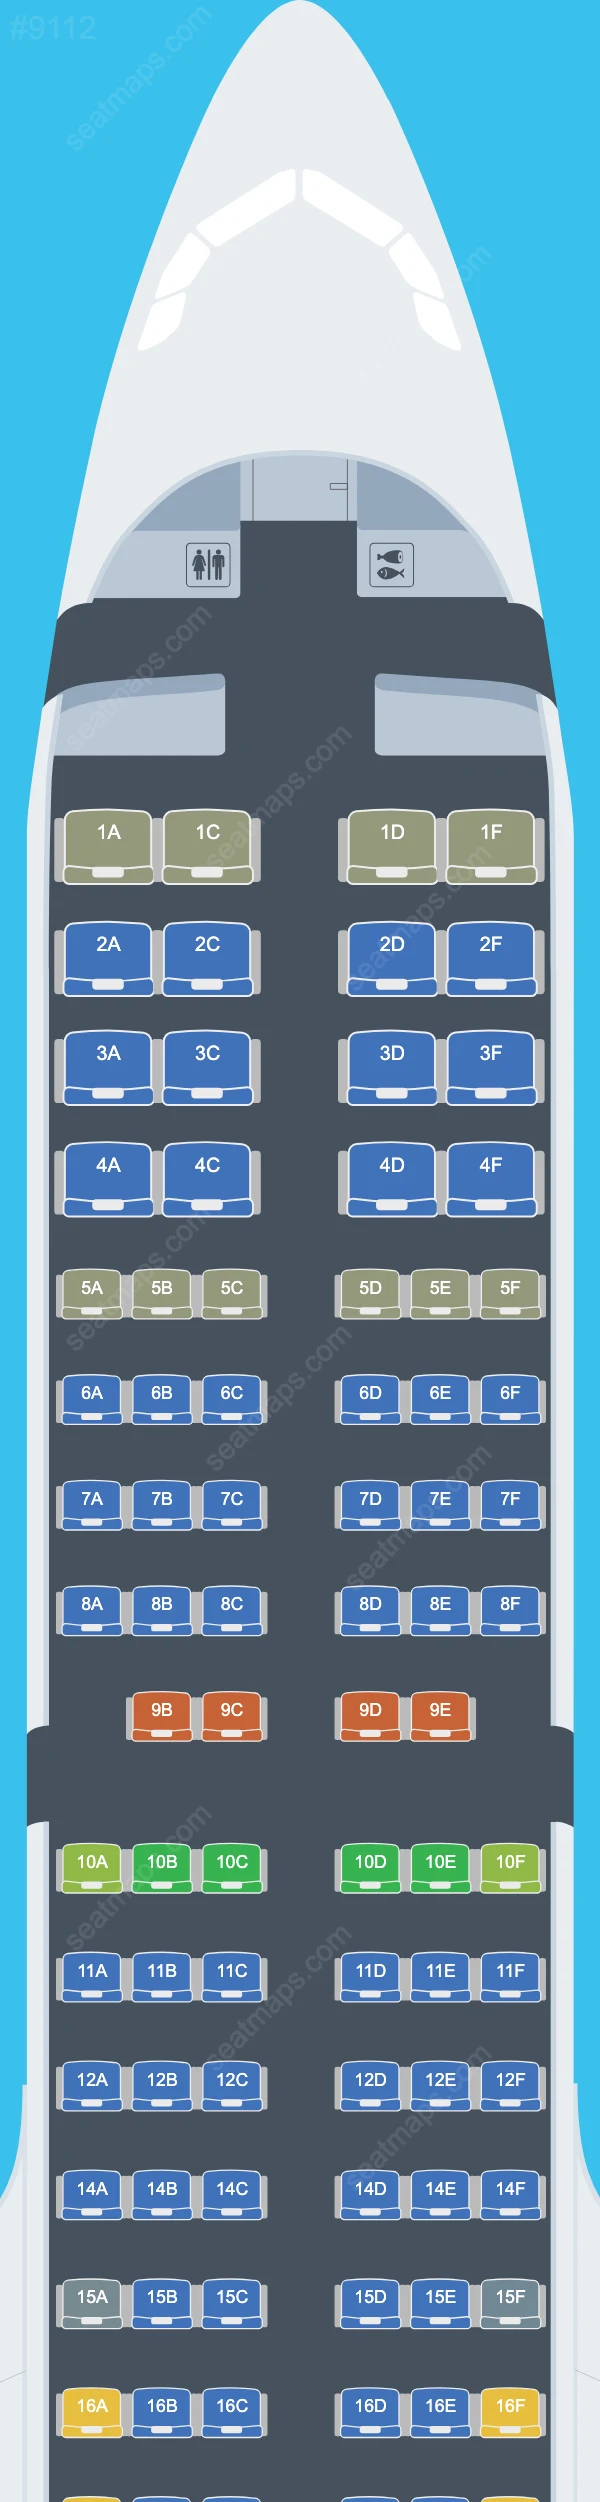 Bamboo Airways Airbus A321 Seat Maps A321-200neo V.1